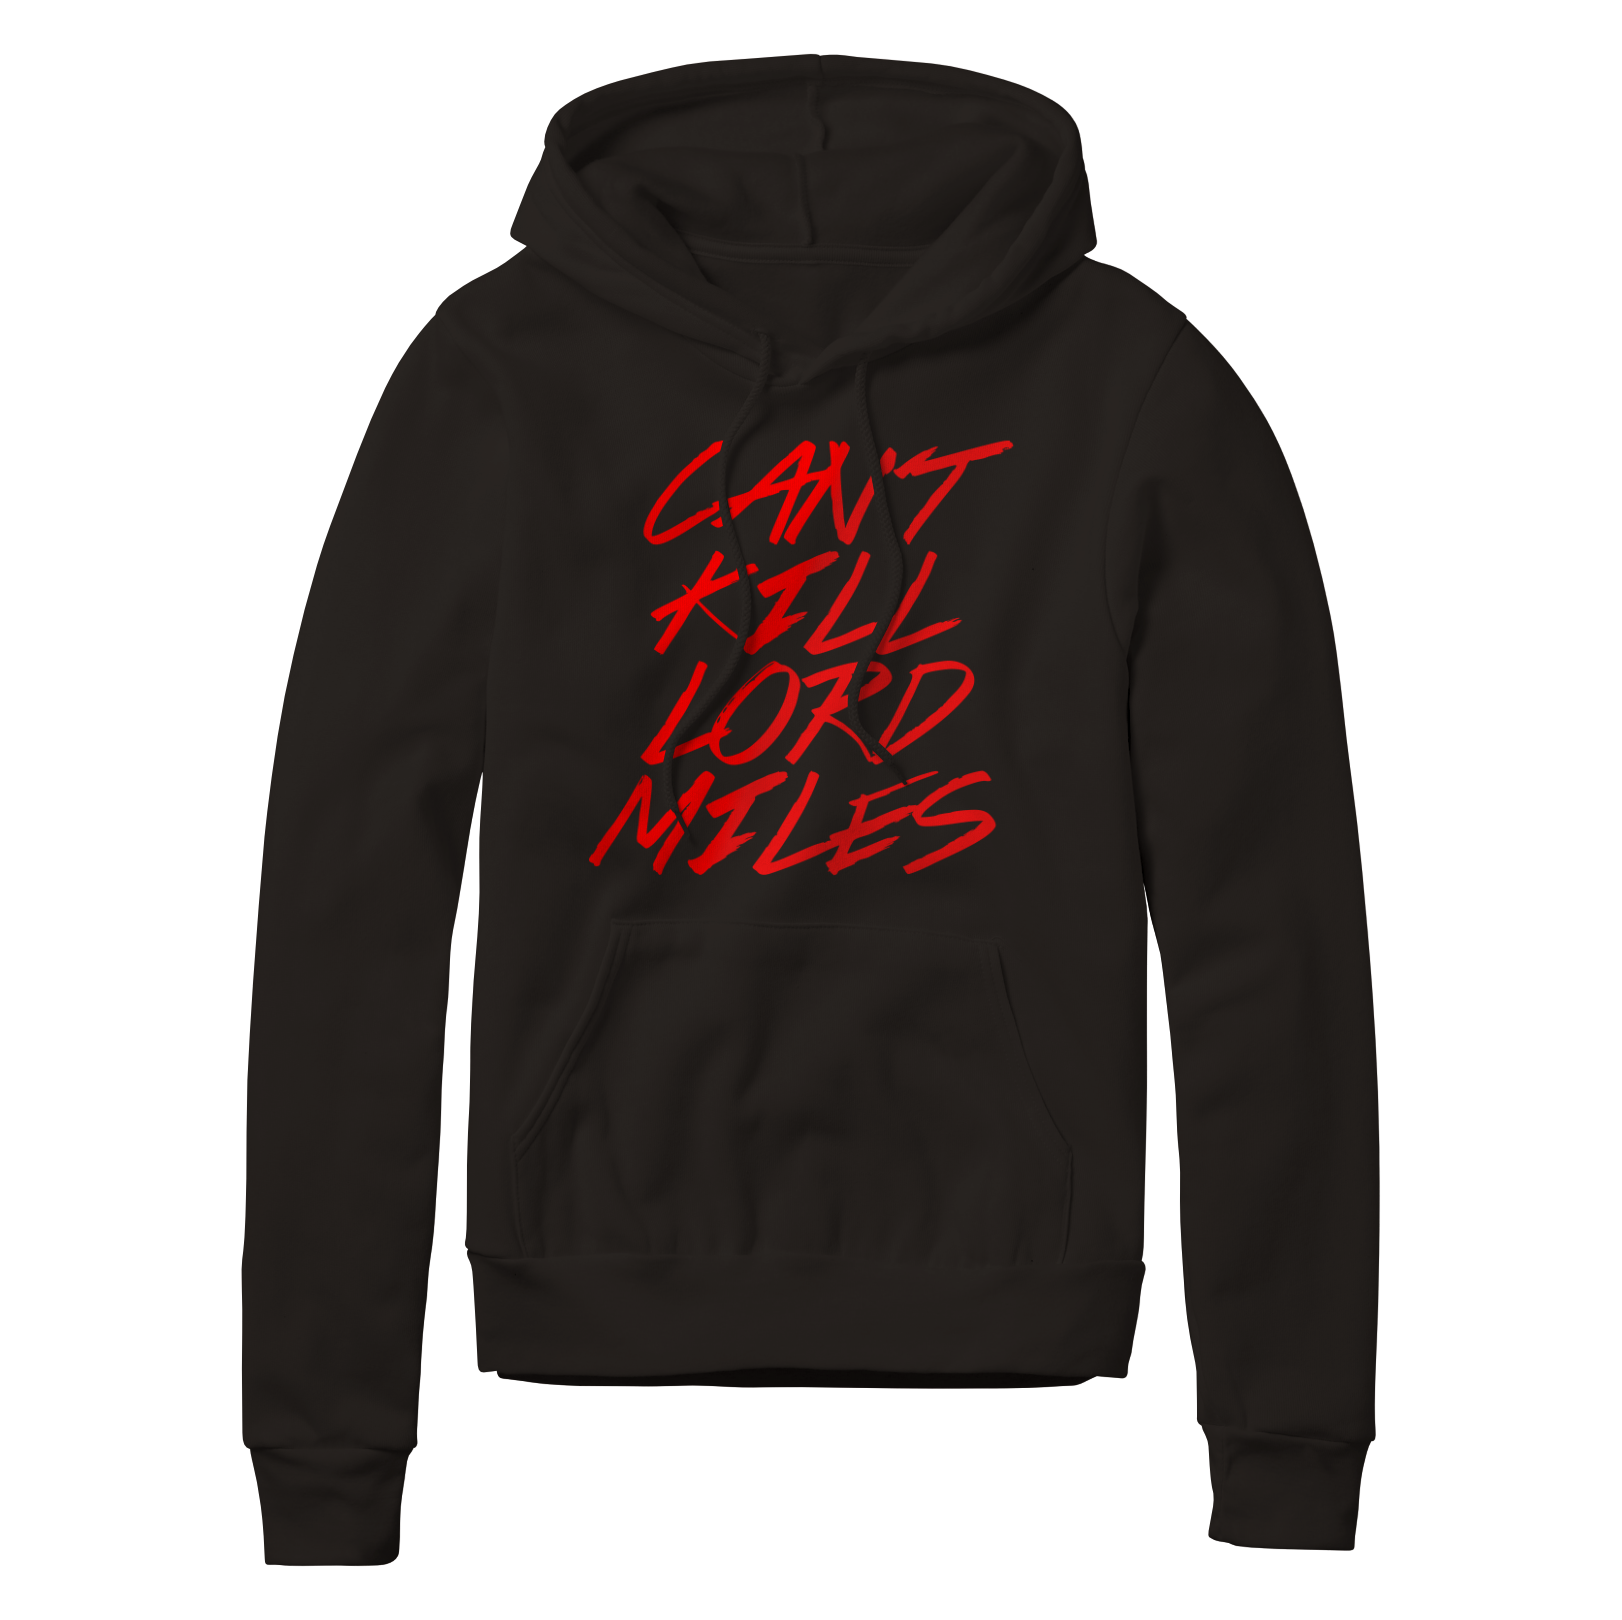 Cant Kill Lord Miles (Red) Hoodie-1